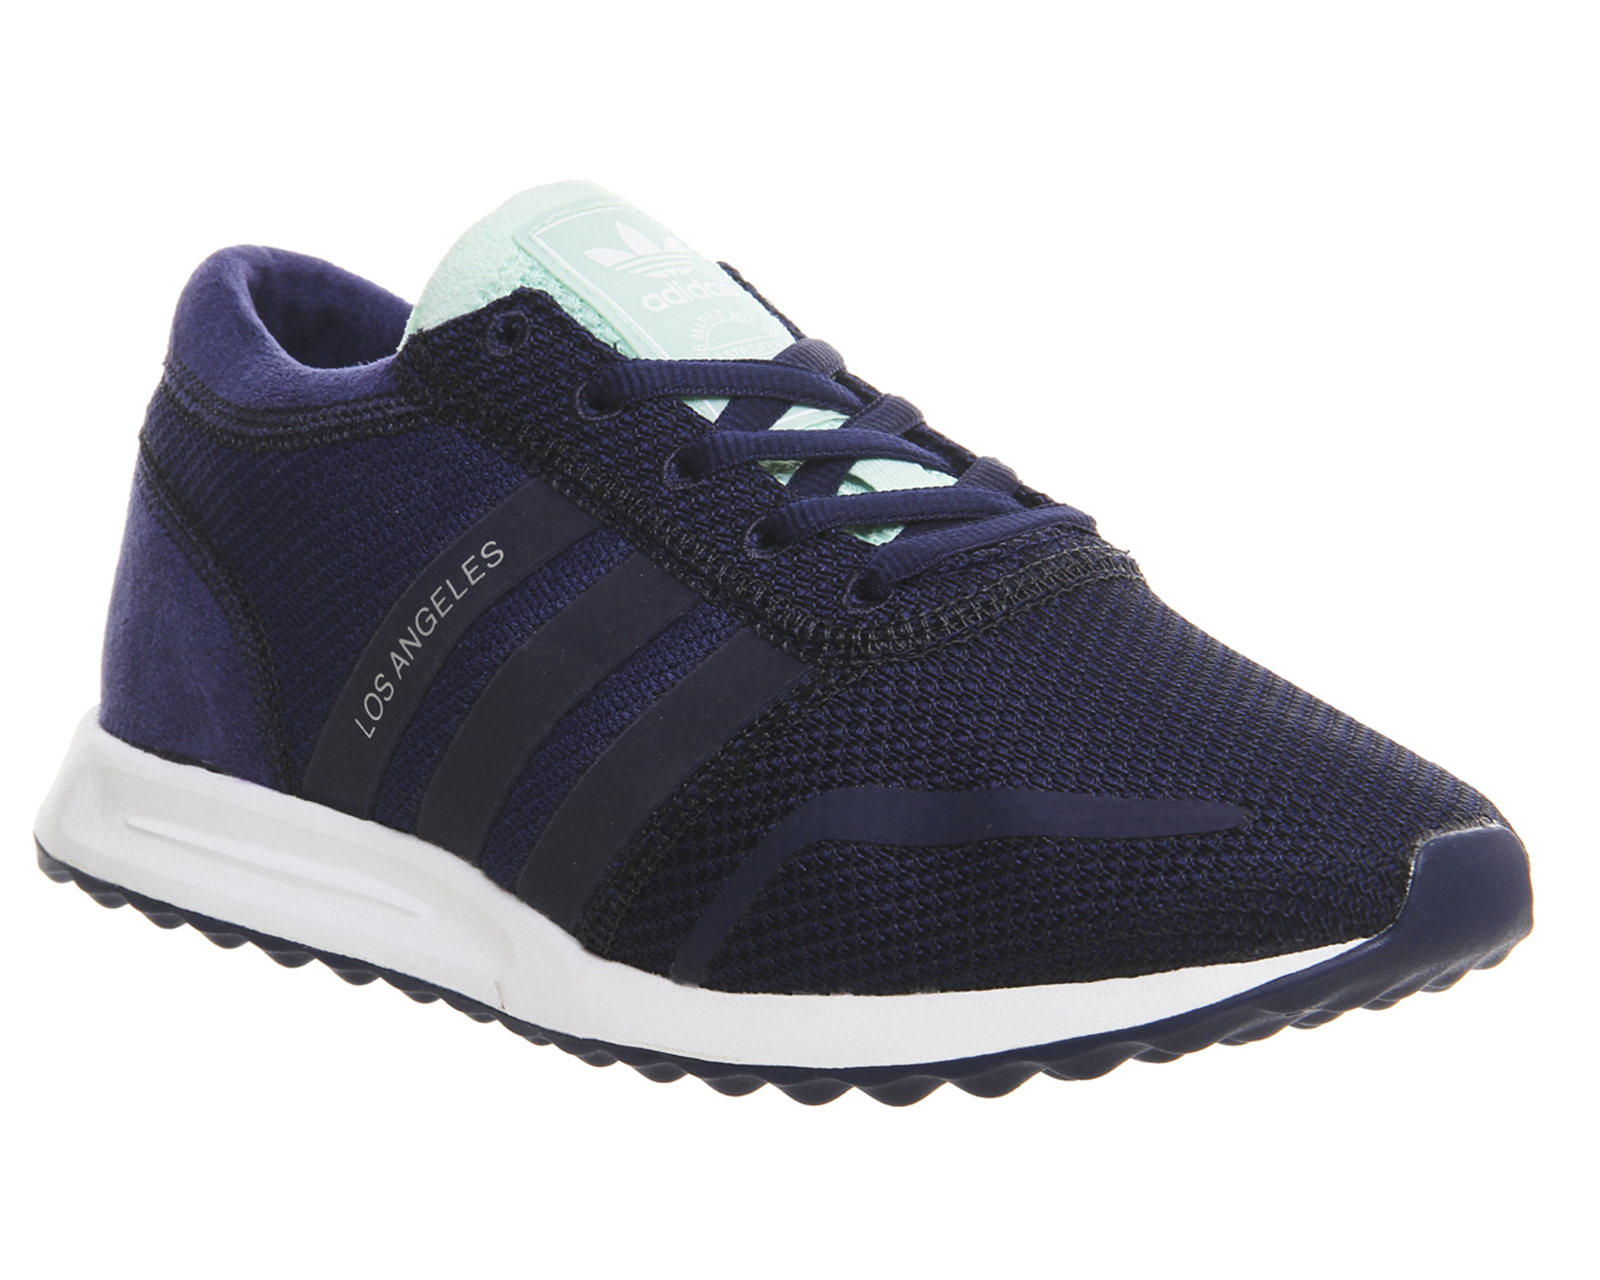 adidas los angeles trainers navy